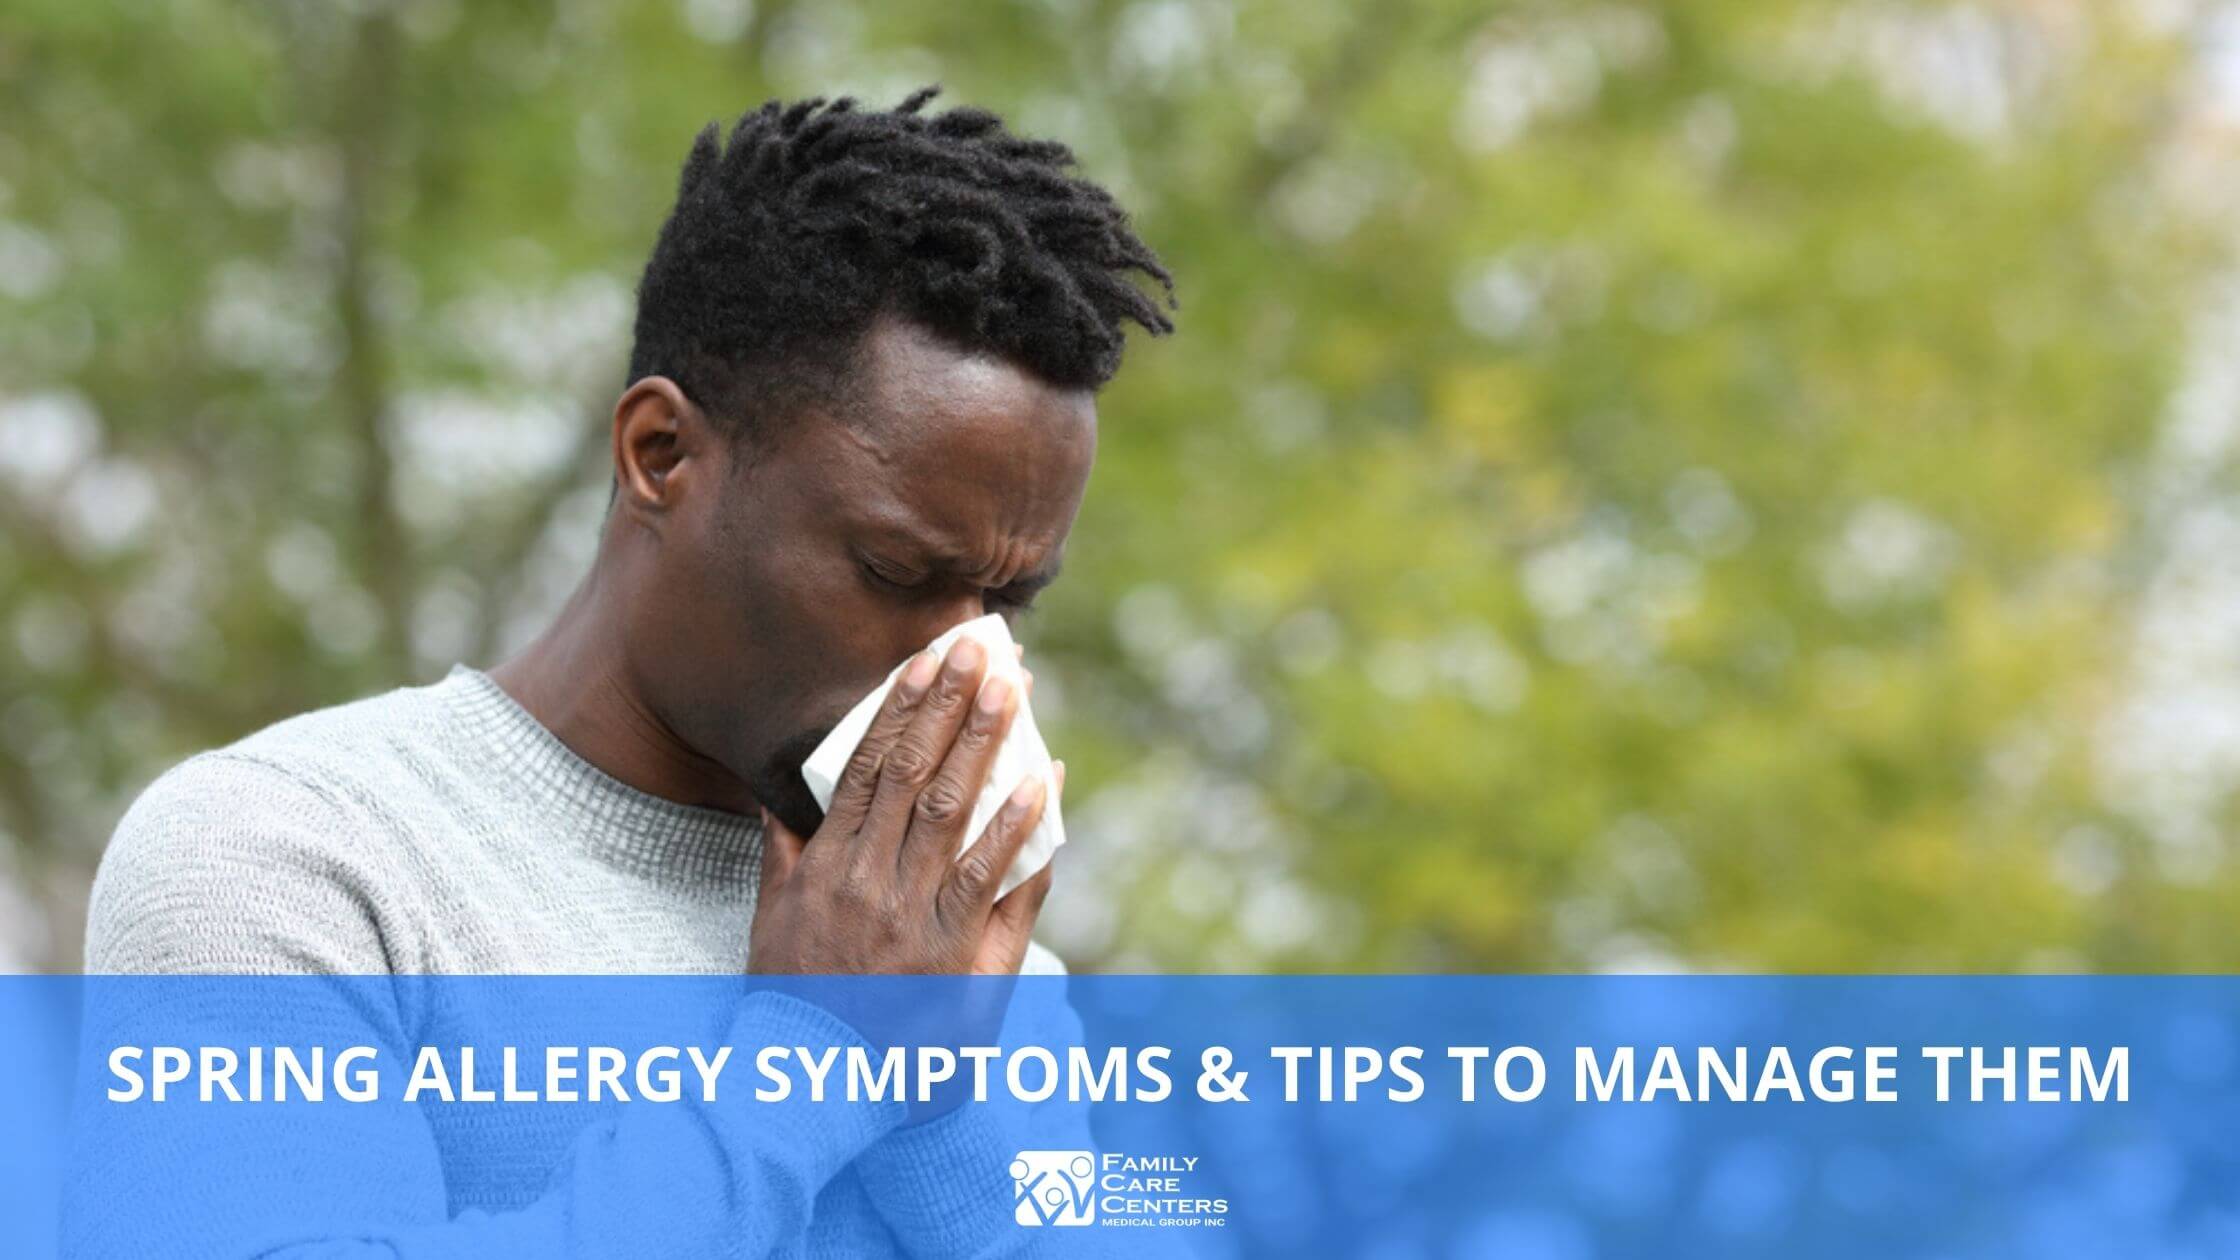 Spring Allergy Symptoms & Tips to Manage Them